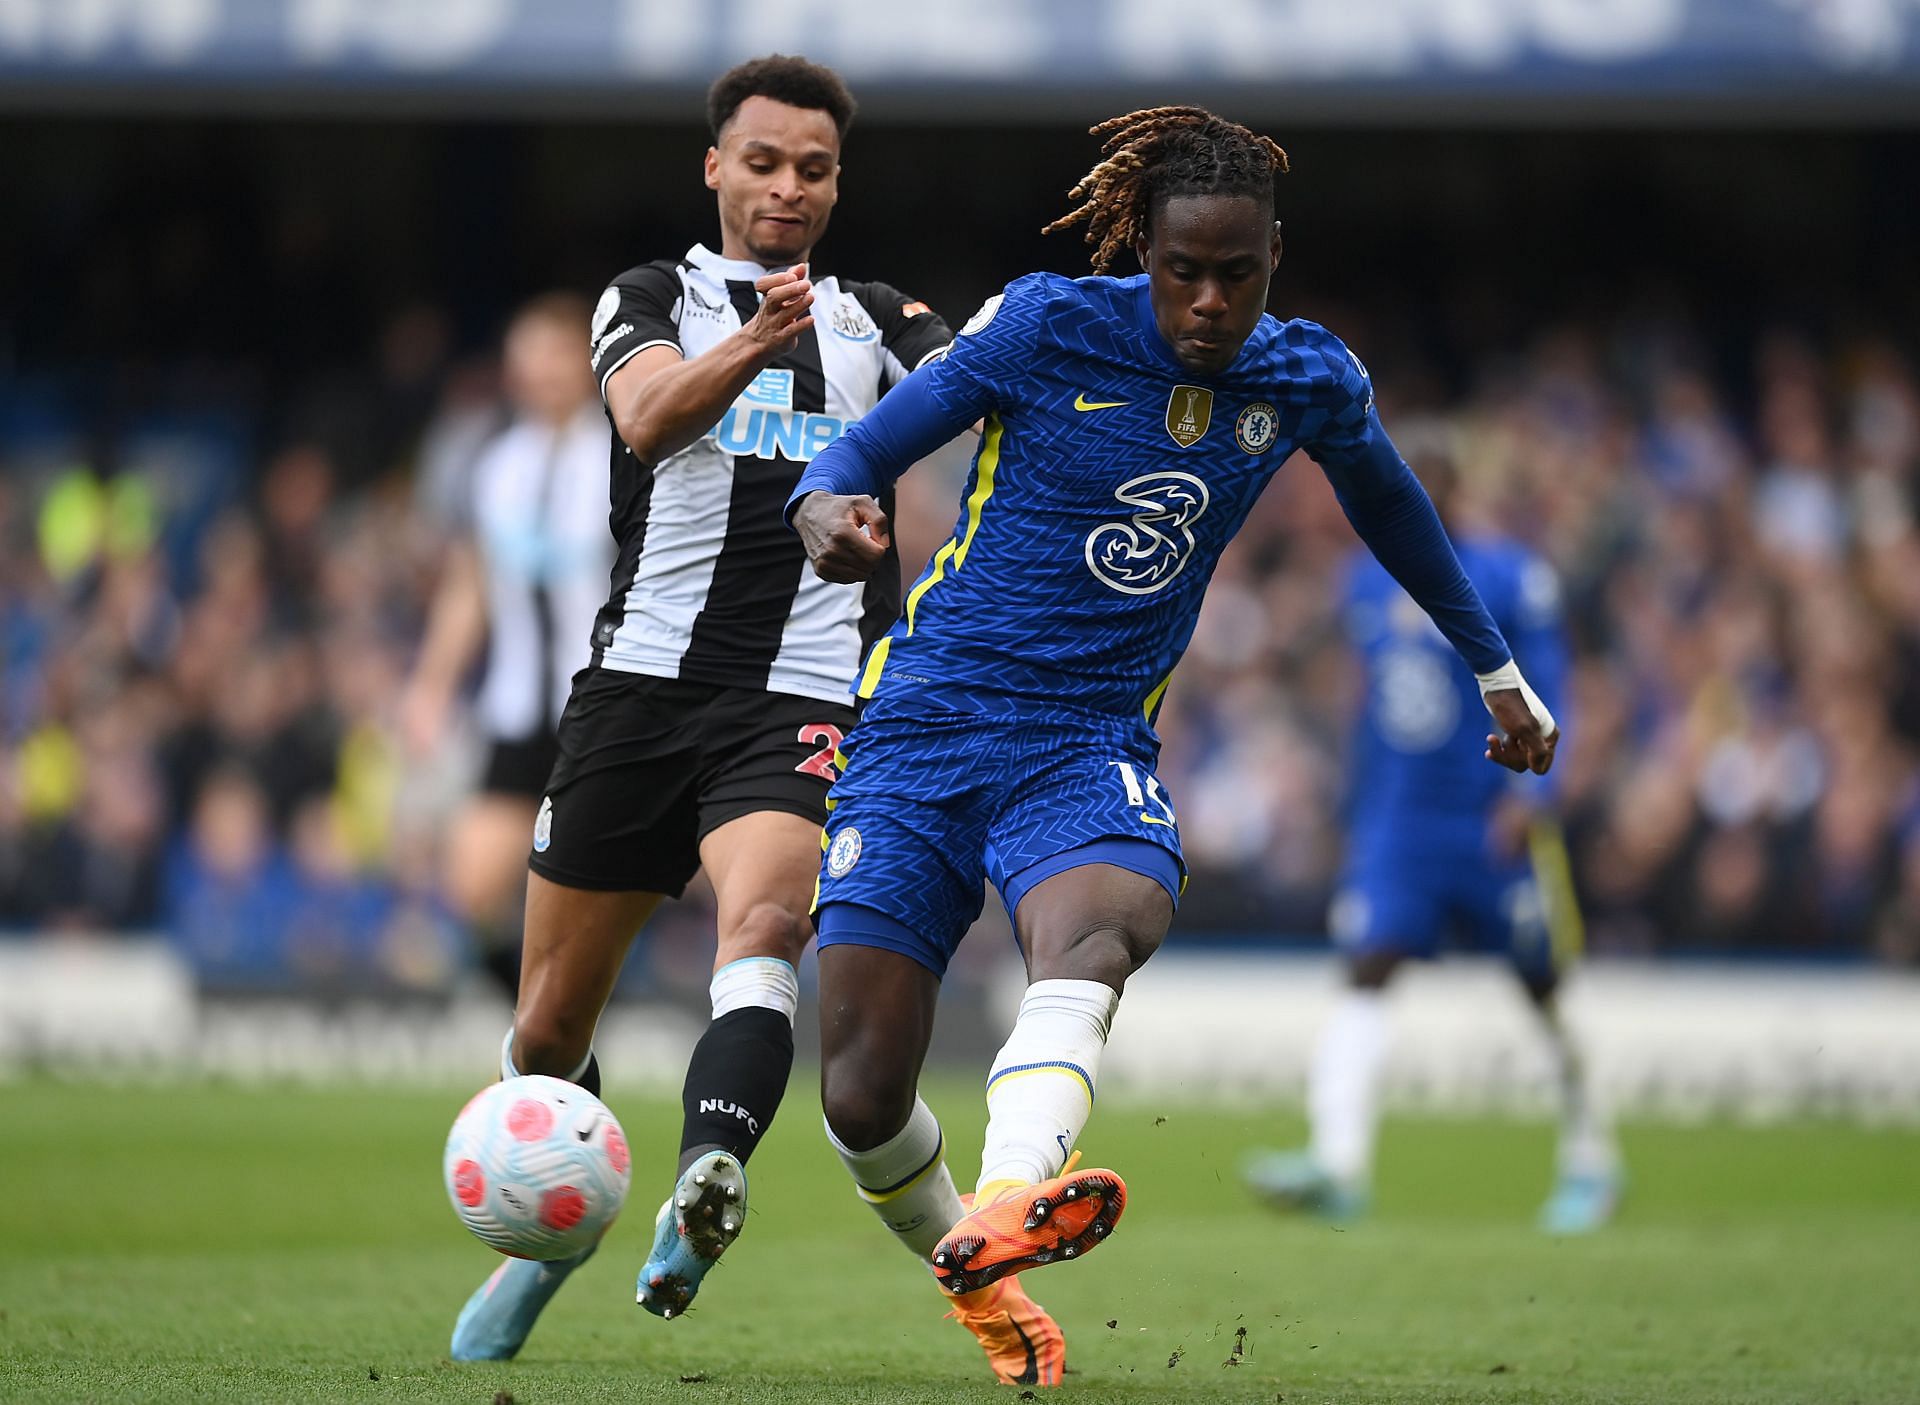 Trevoh Chalobah (right) has gone from strength to strength at Stamford Bridge.